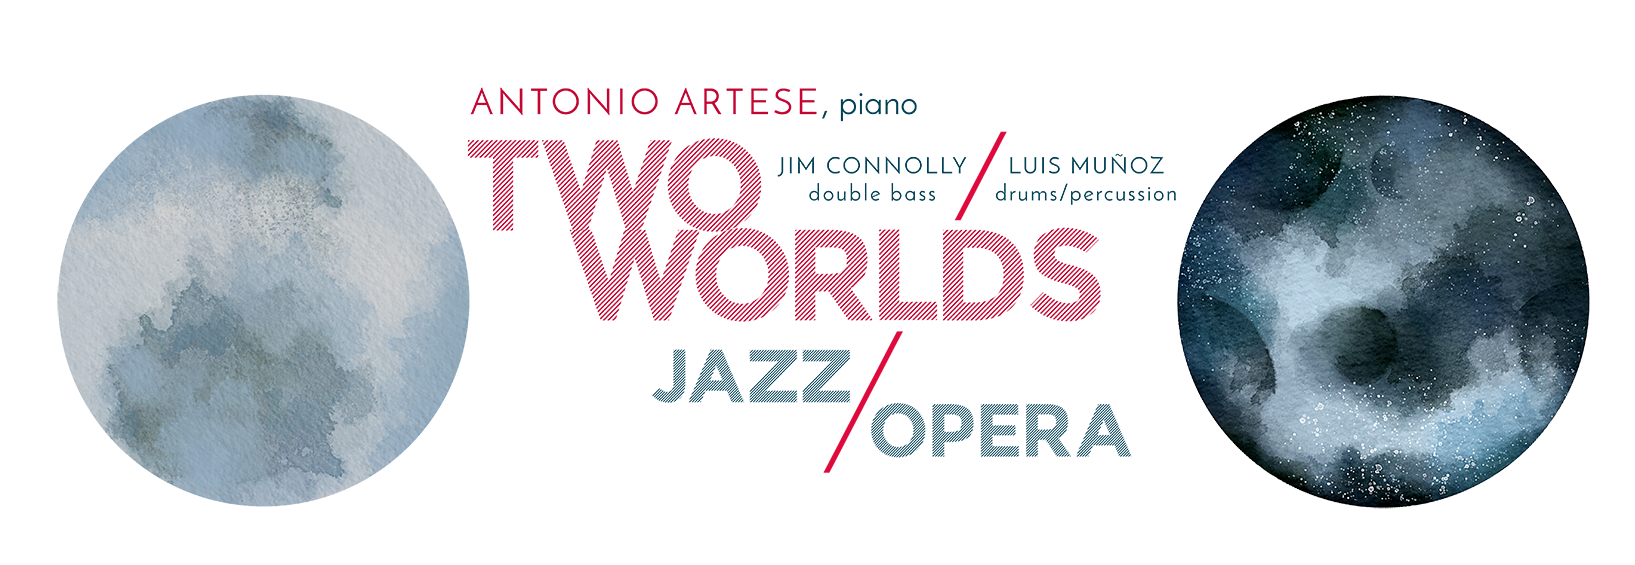 Two-Worlds-Concert